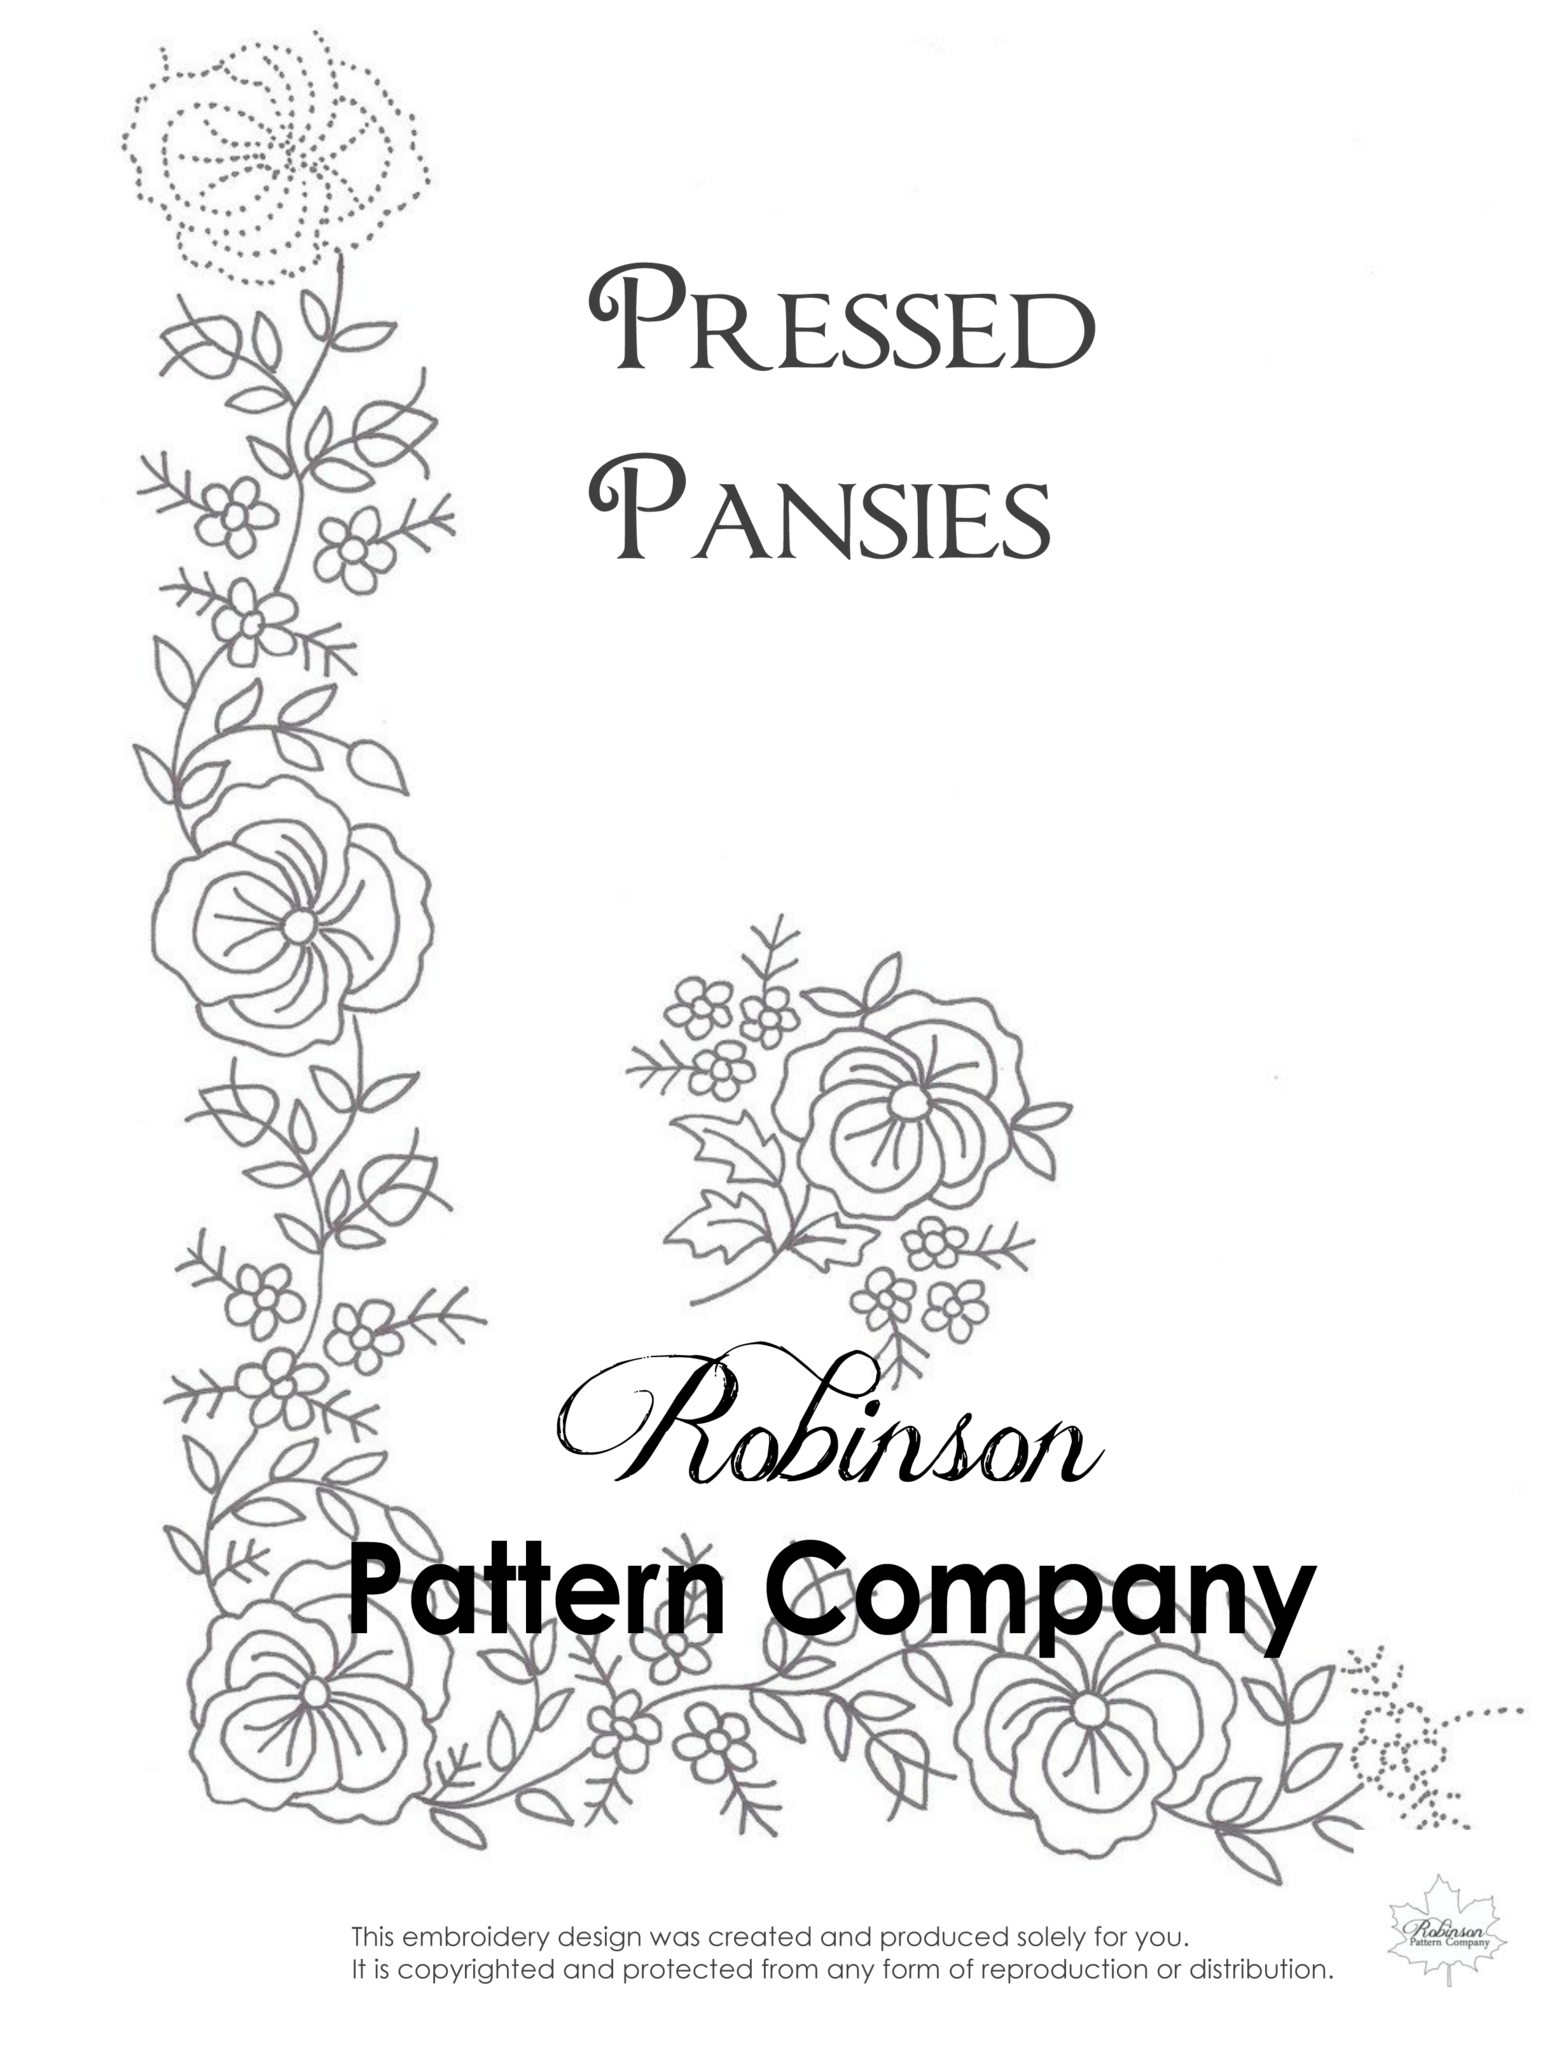 Pressed Pansies Hand Embroidery pattern